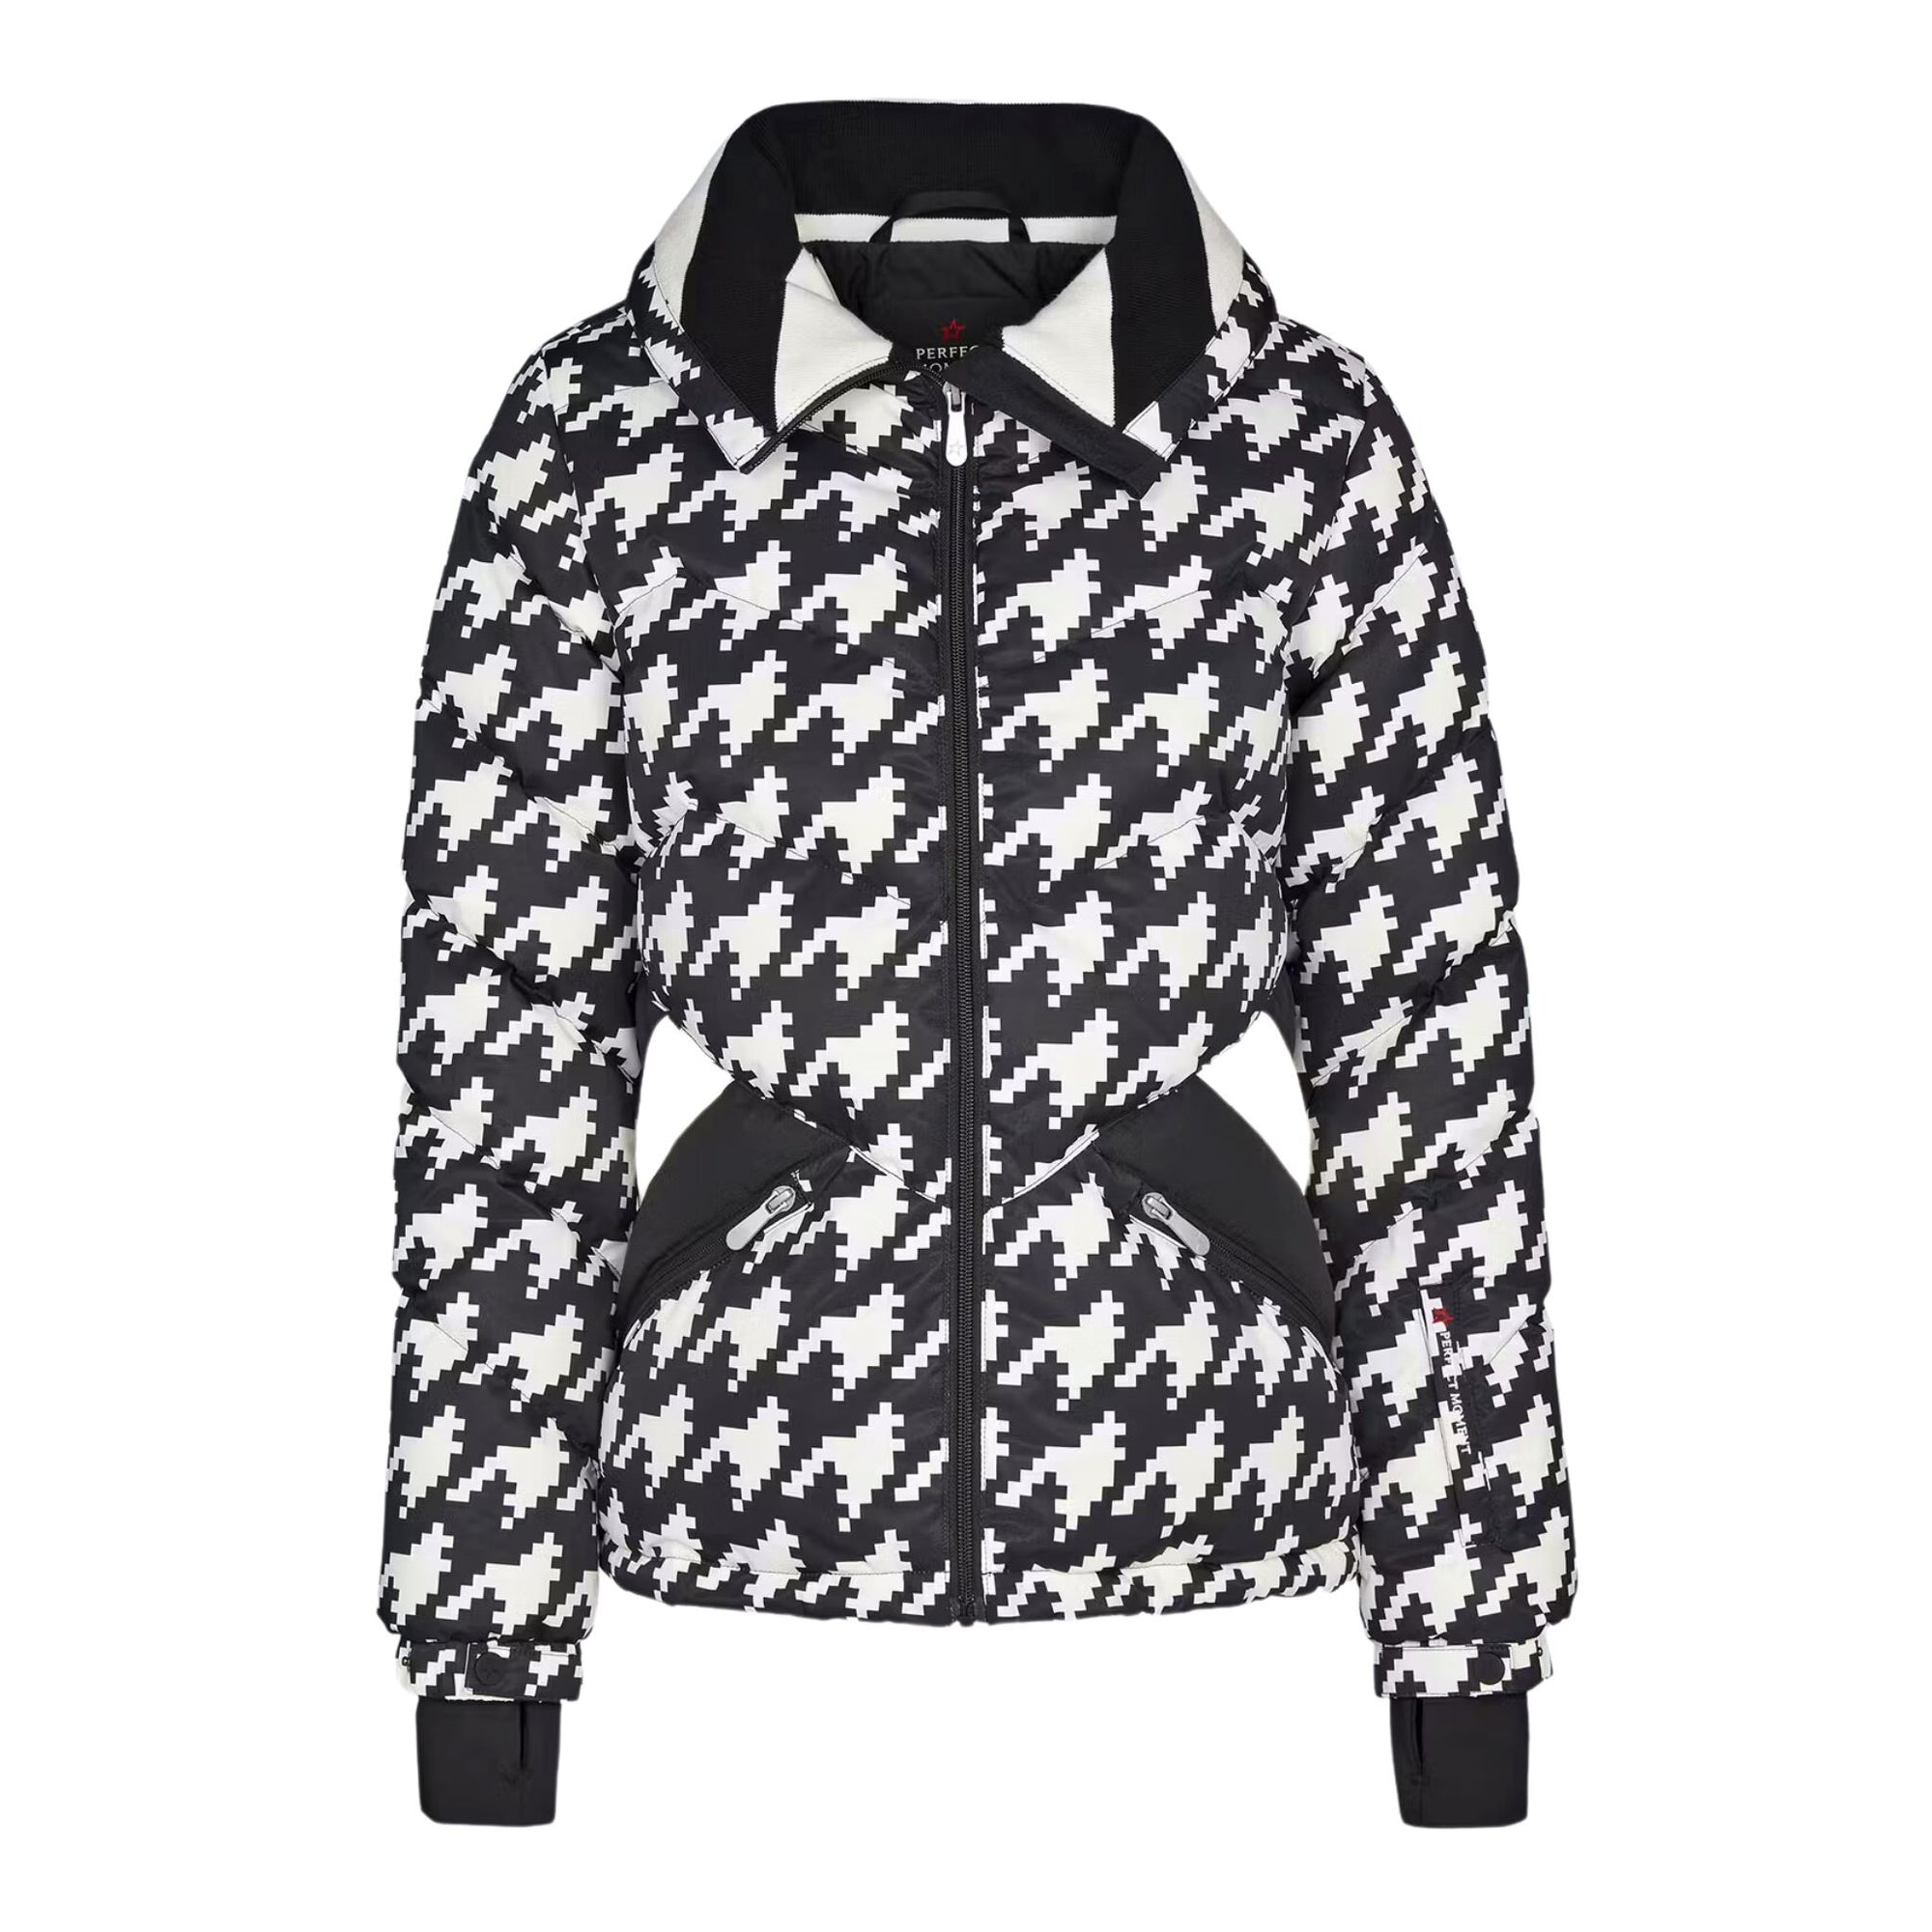 Womens Perfect Moment Ski Duvet Jacket - Houndstooth Black/White Jackets Perfect Moment 